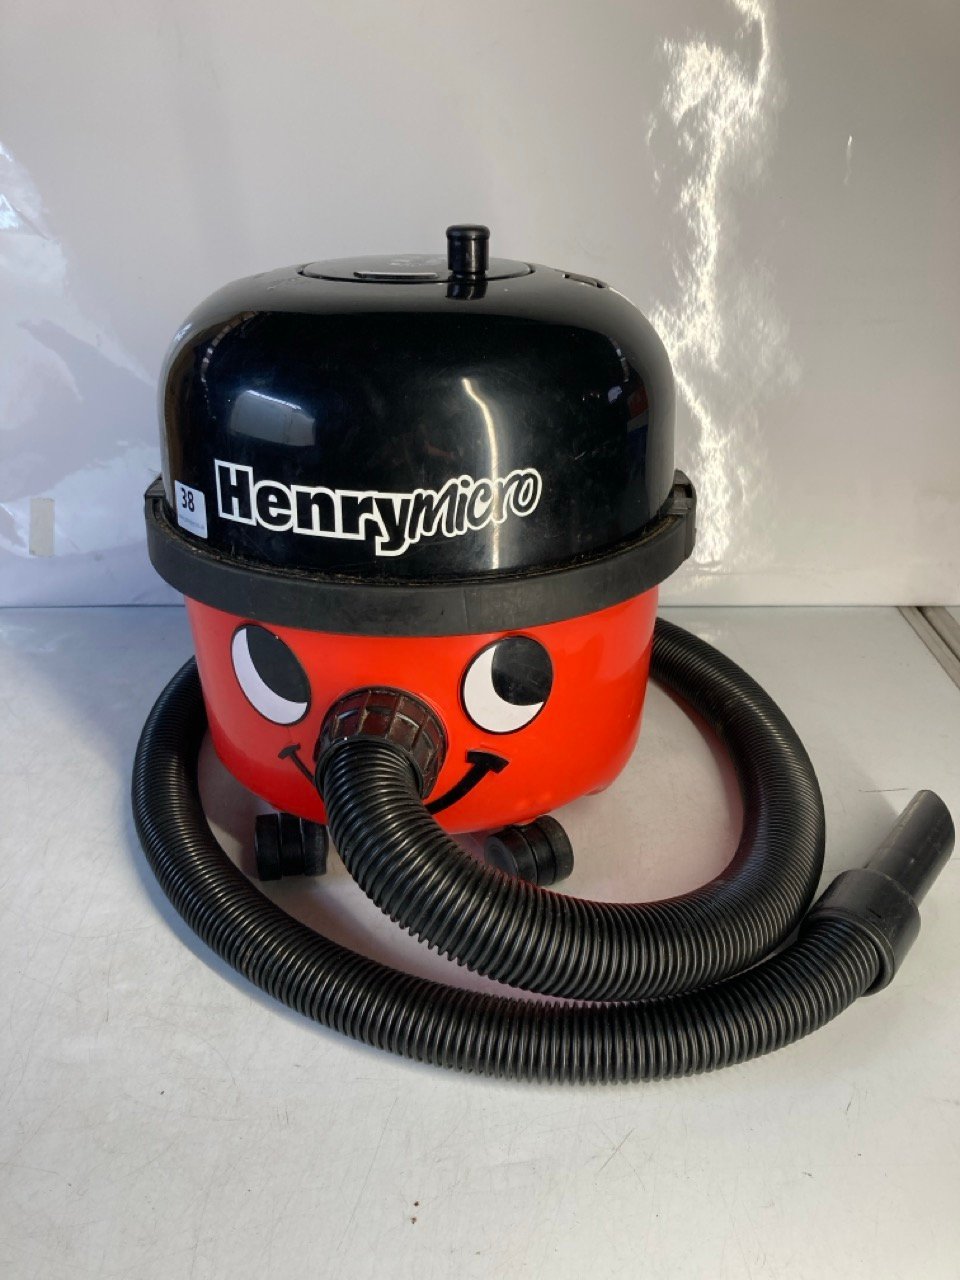 A HENRY MICRO VACUUM CLEANER